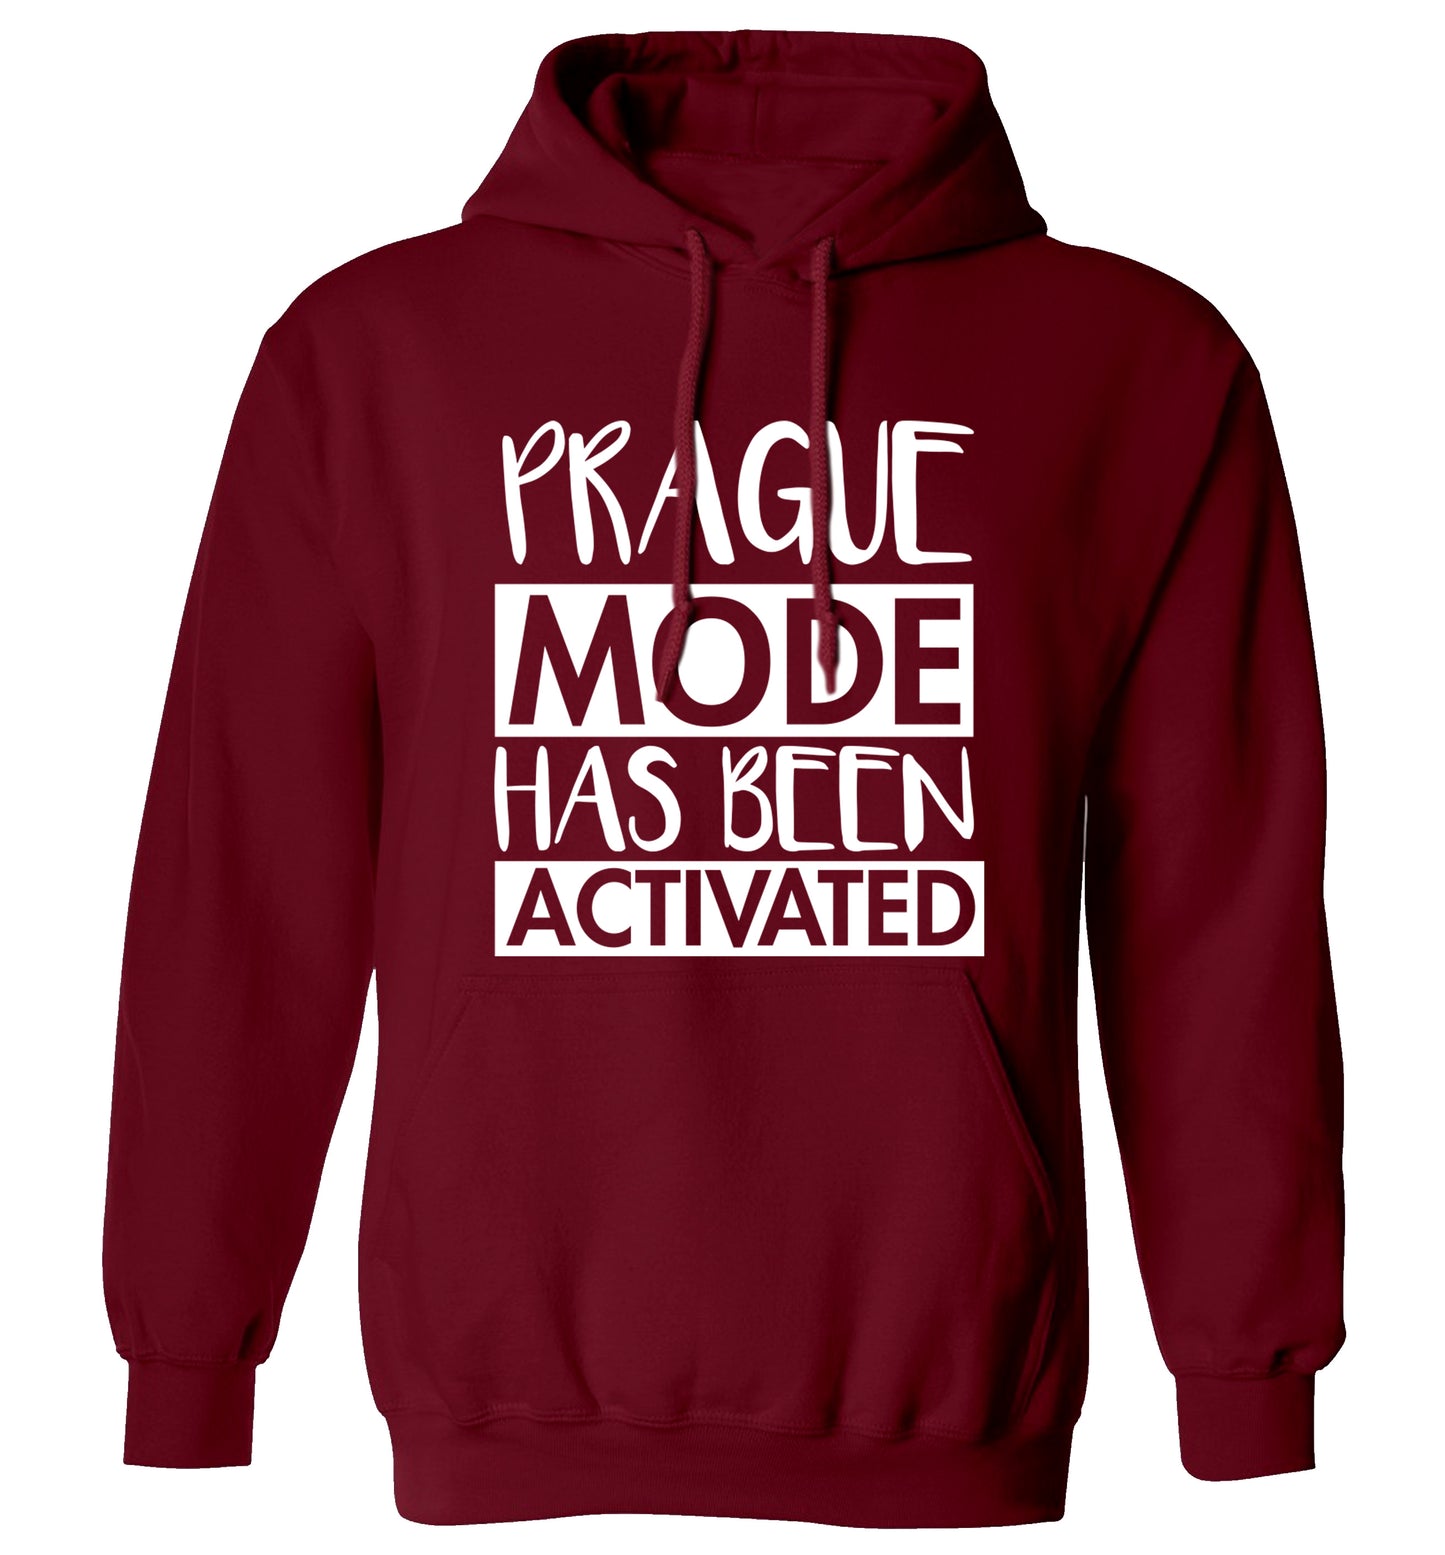 Prague mode has been activated adults unisex maroon hoodie 2XL